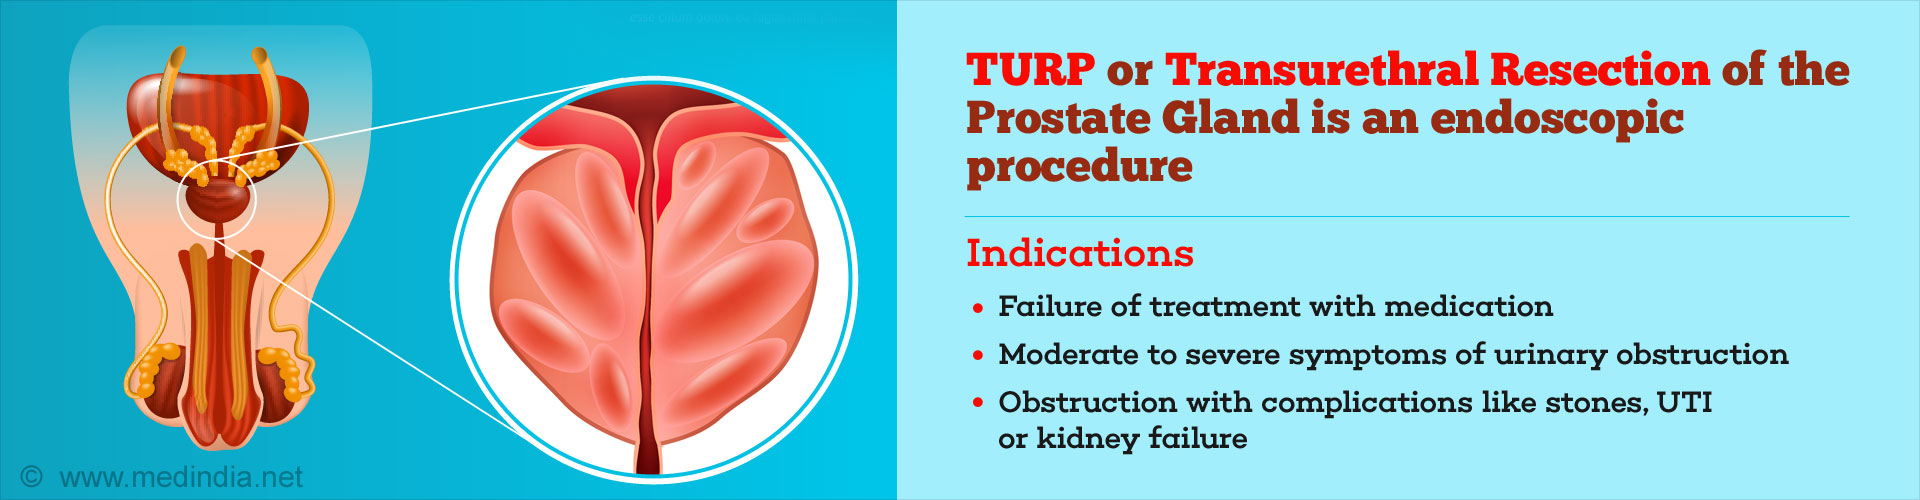 Transurethral Resection Of Prostate Turp For Prostate Enlargement 8033